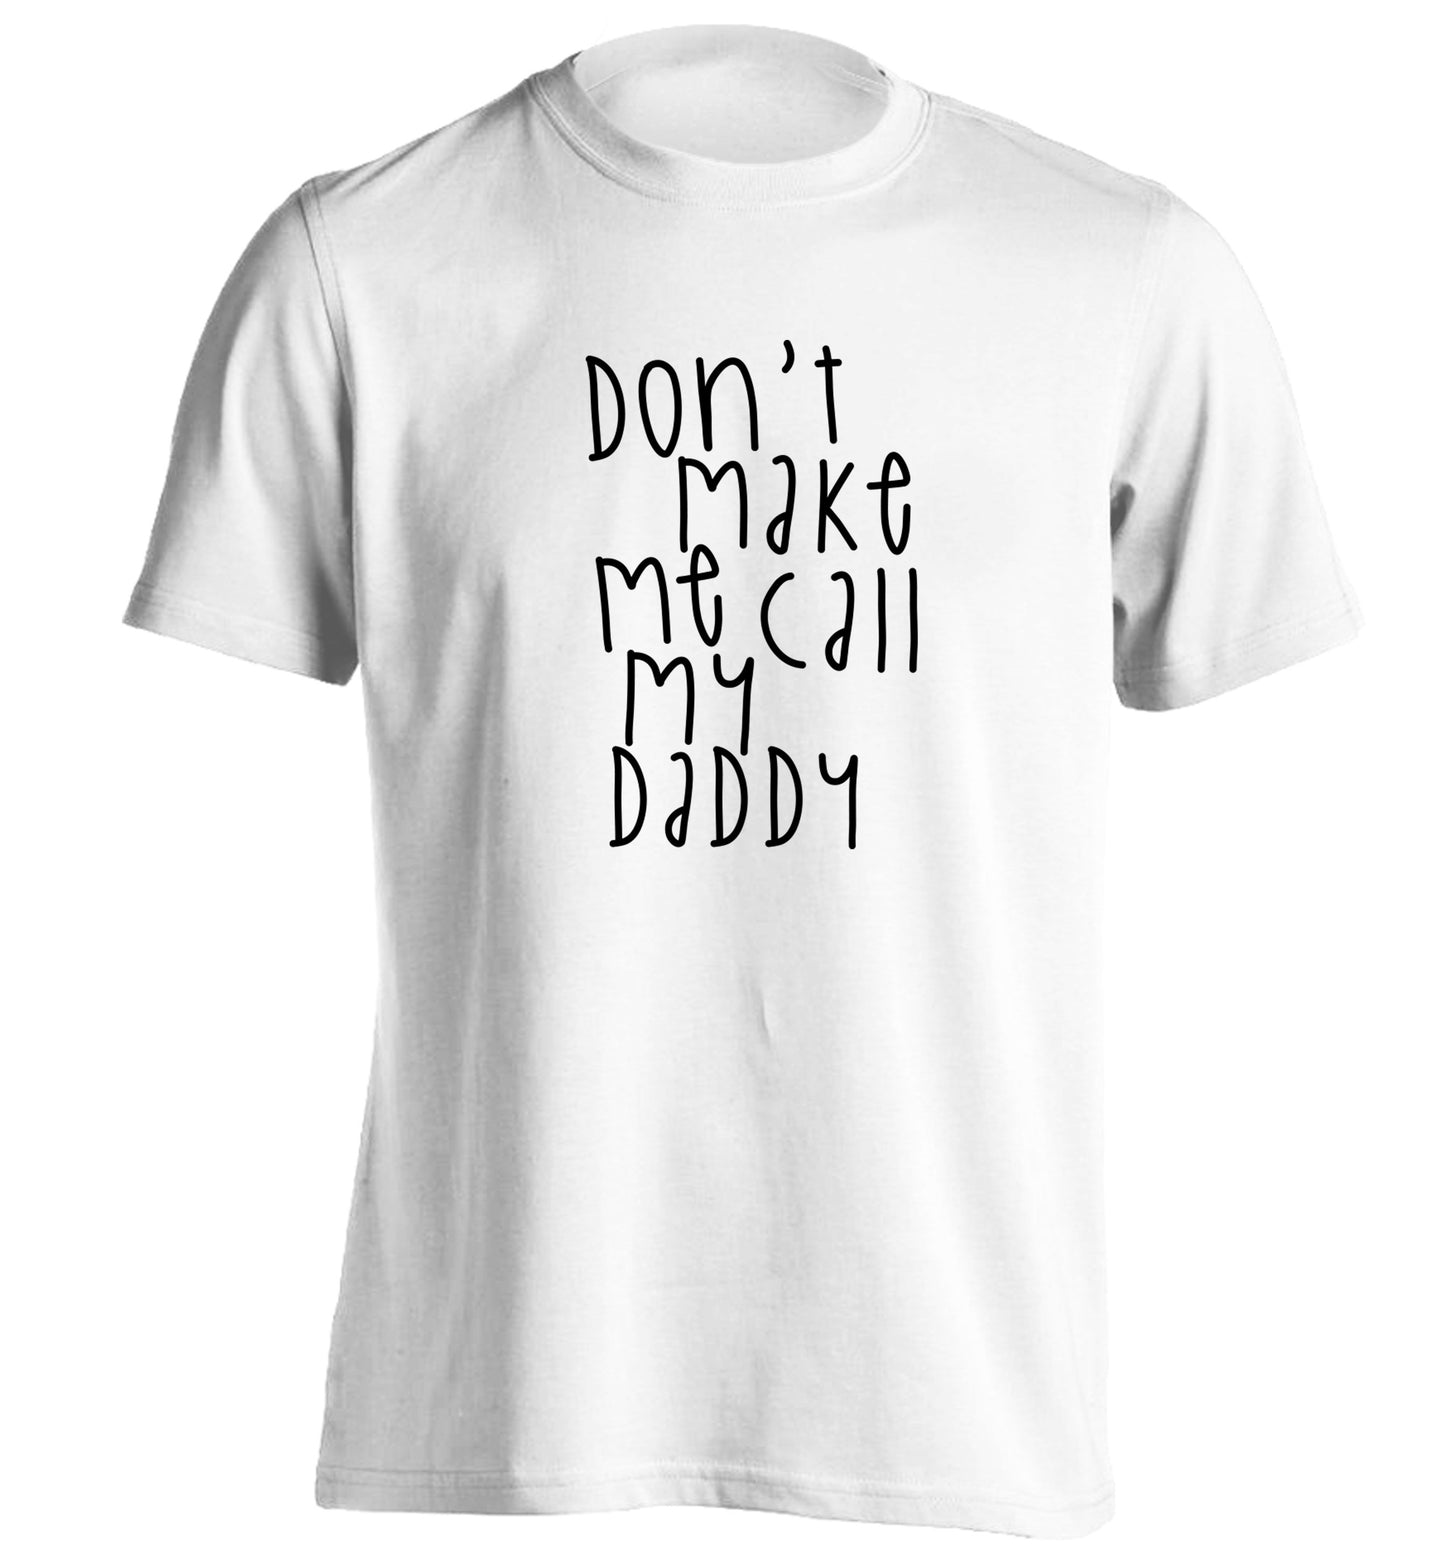 Don't make me call my daddy adults unisex white Tshirt 2XL